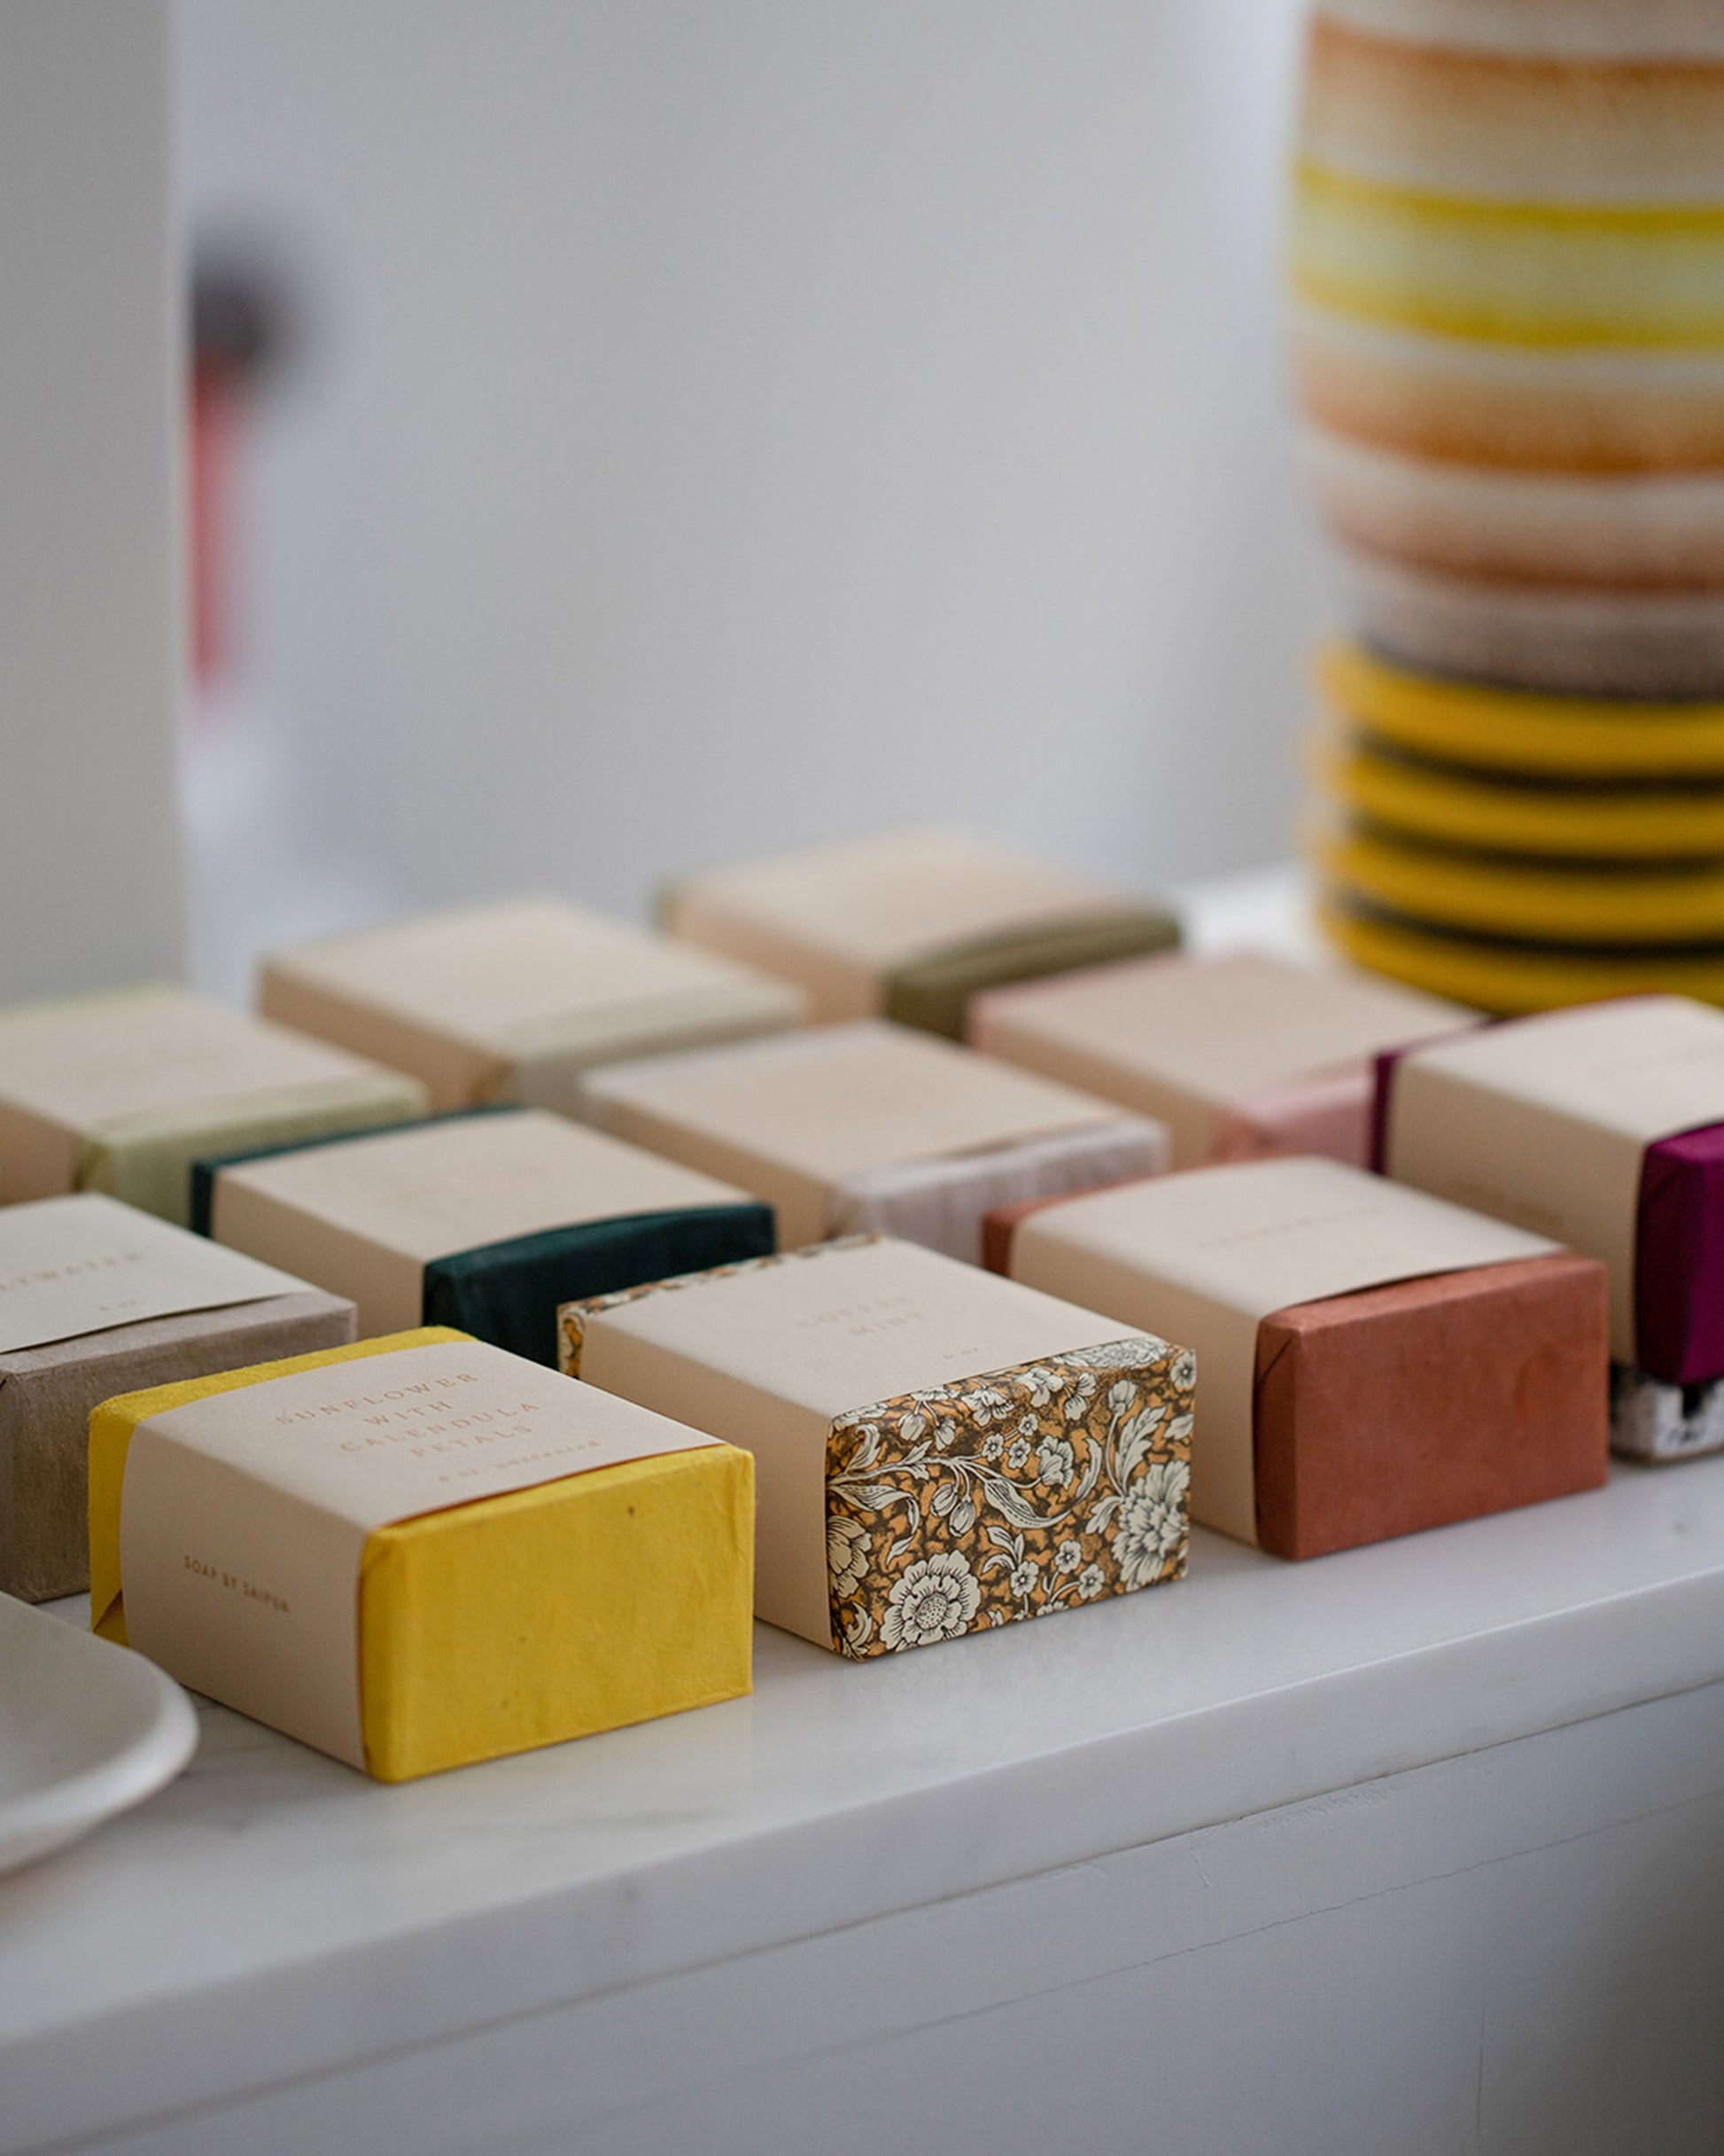 Styled image featuring a groupd of Saipua Soaps.